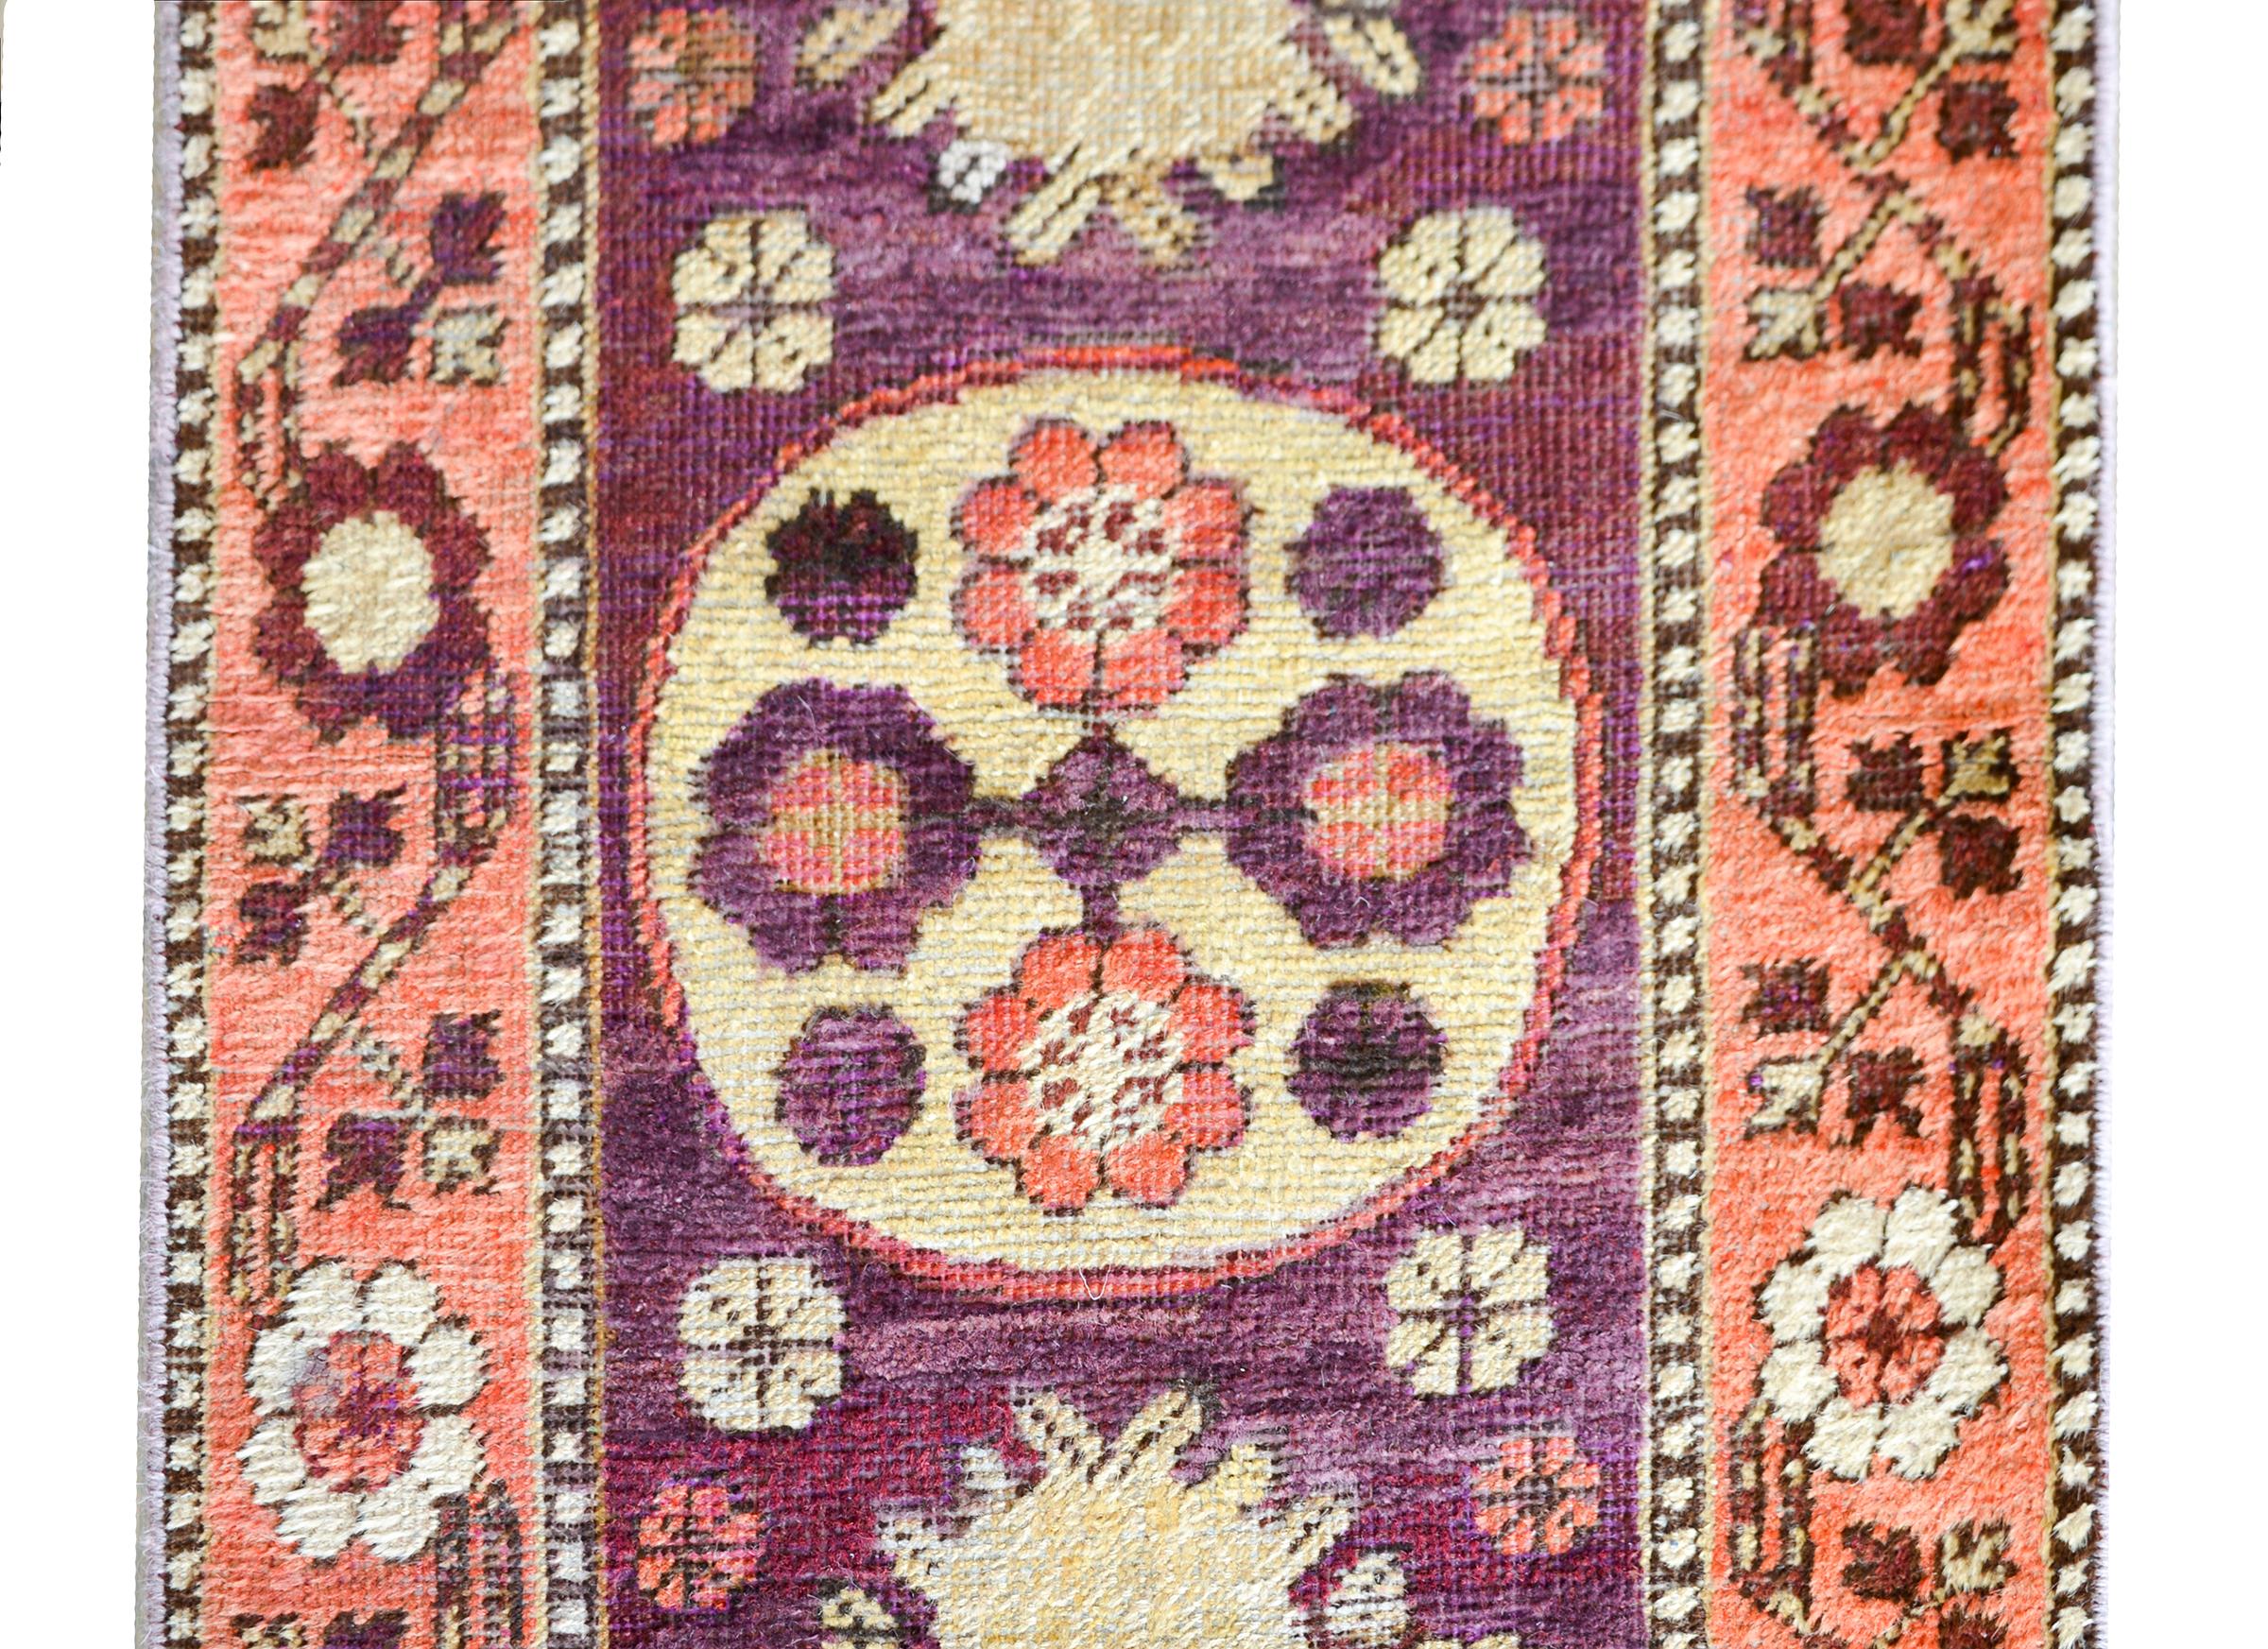 An early 20th century Central Asian Khotan runner with three wonderful large medallions with stylized floral clusters amidst a field of more stylized flowers against a dark violet background and surrounded by a border containing more flowers and